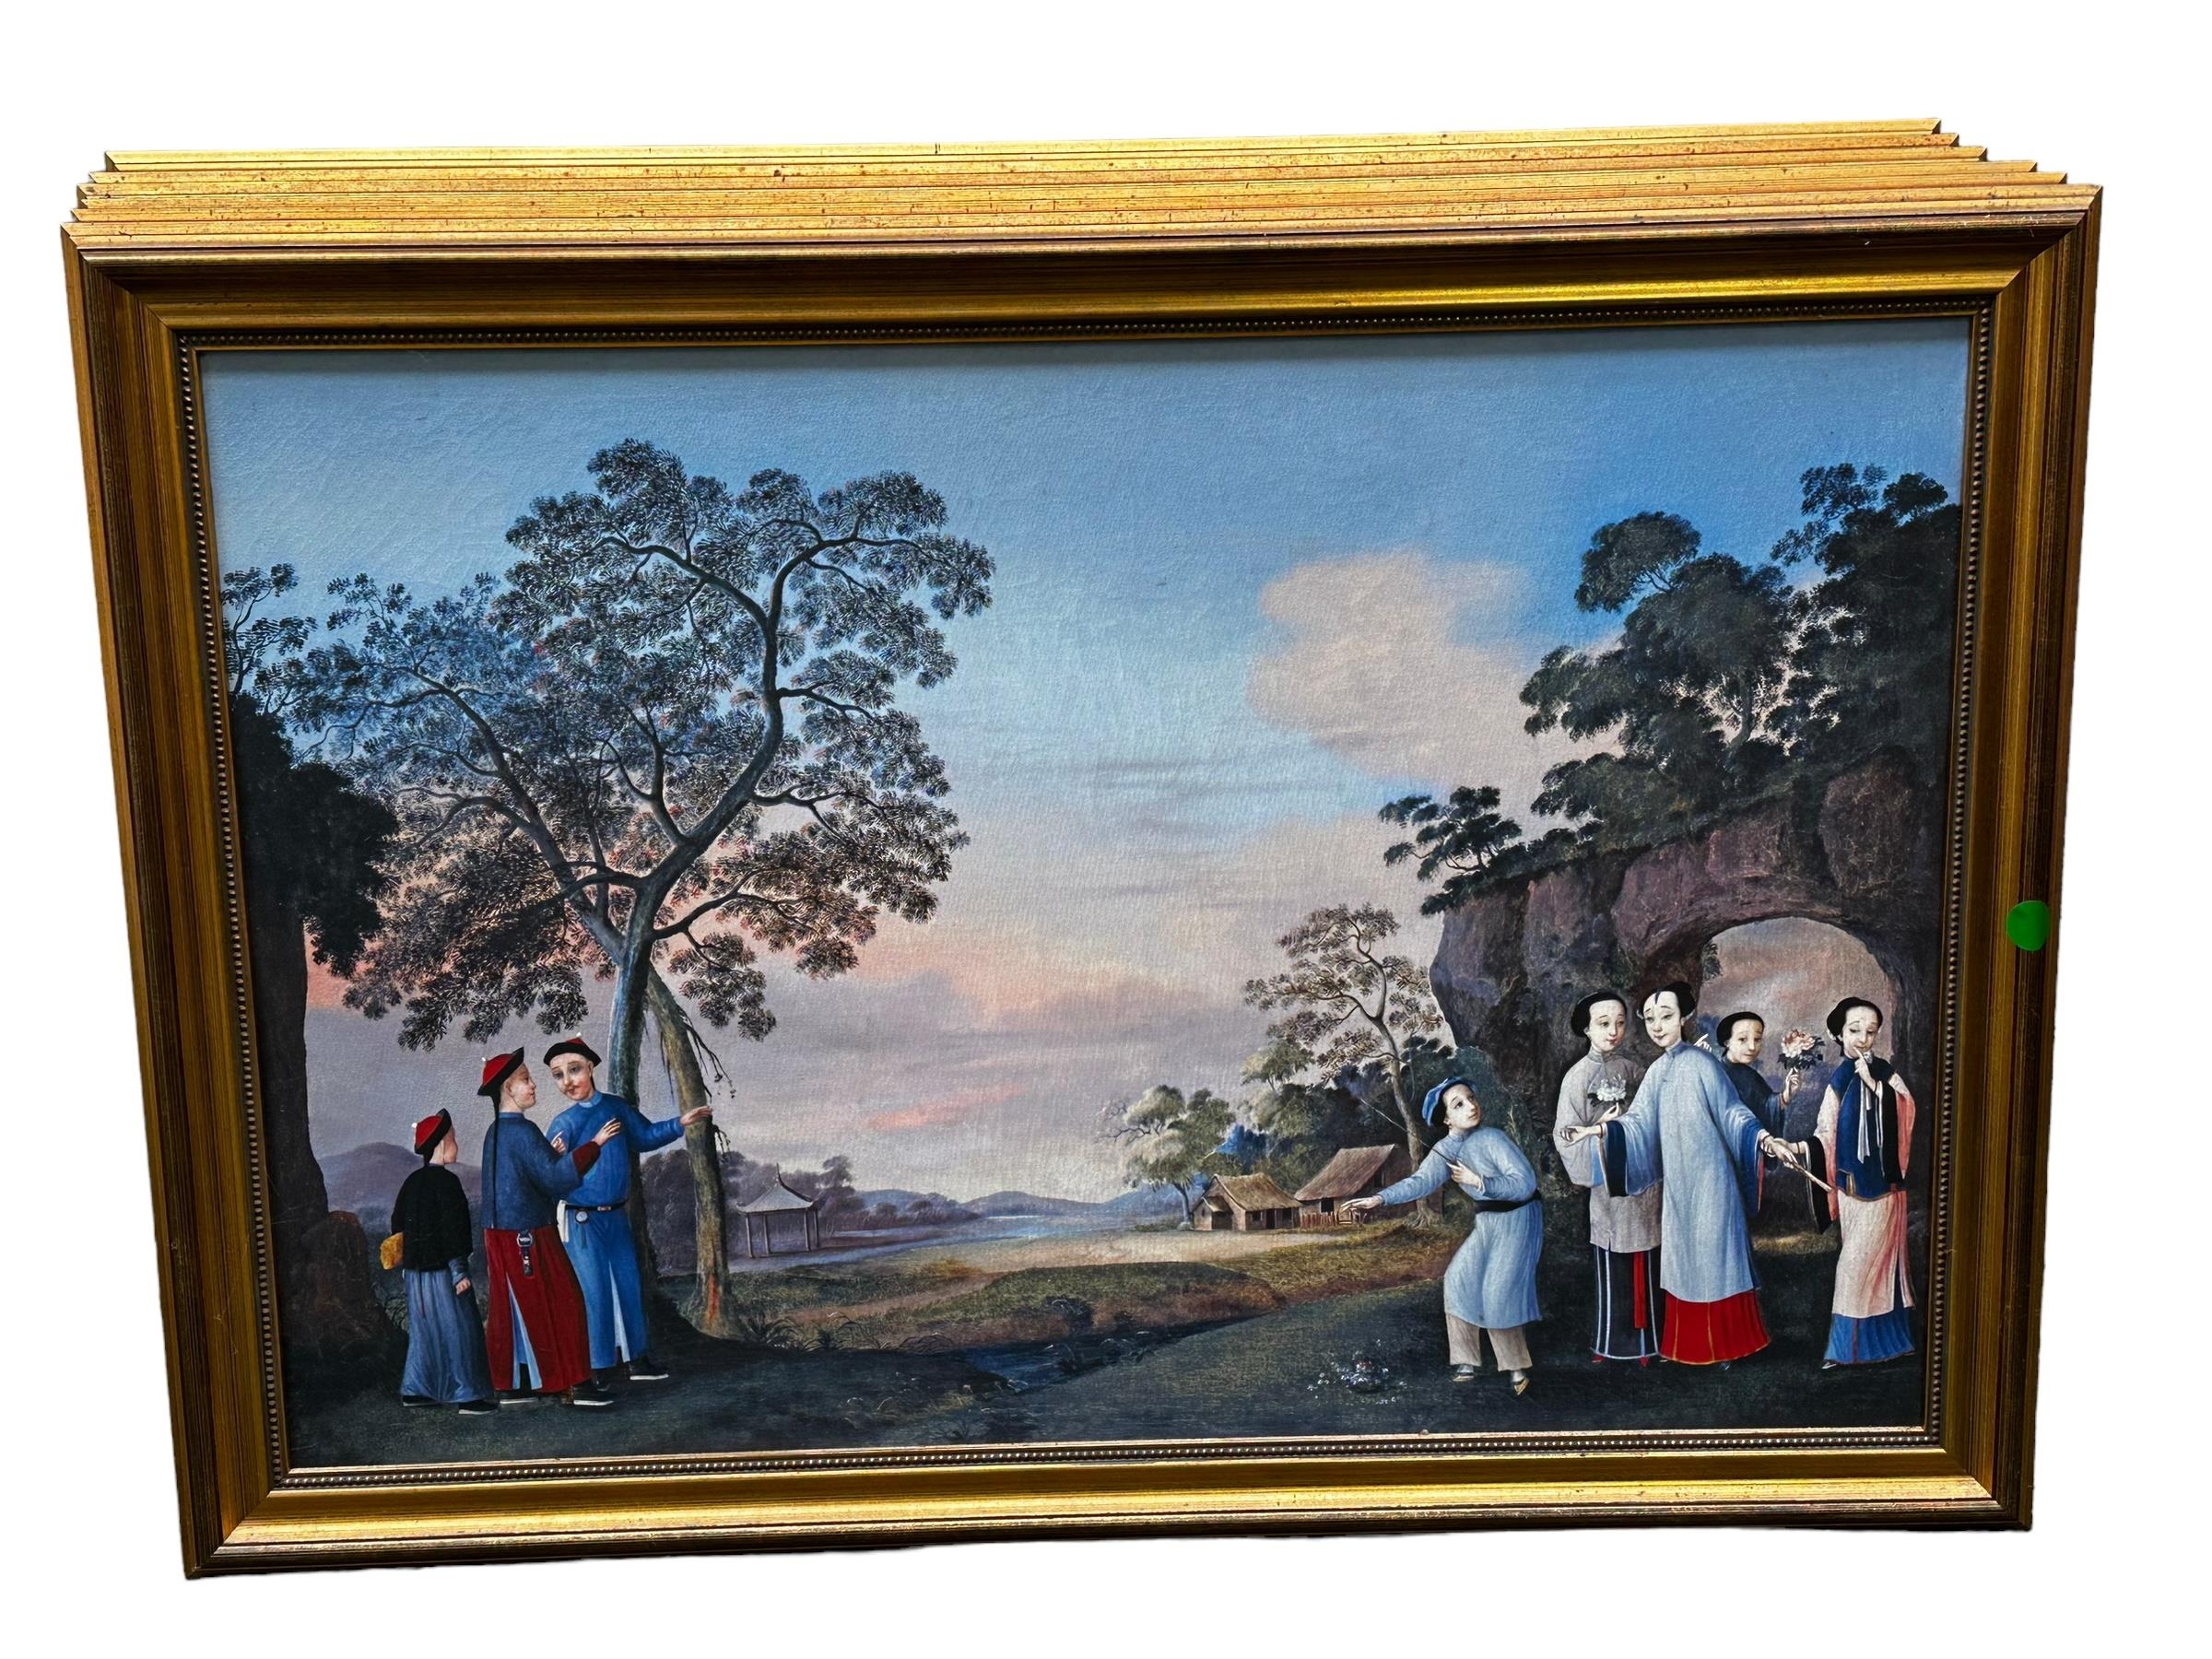 A Set of six C20th gilt framed reproduction copy prints, "Views of Chinese social life", from the - Image 2 of 8